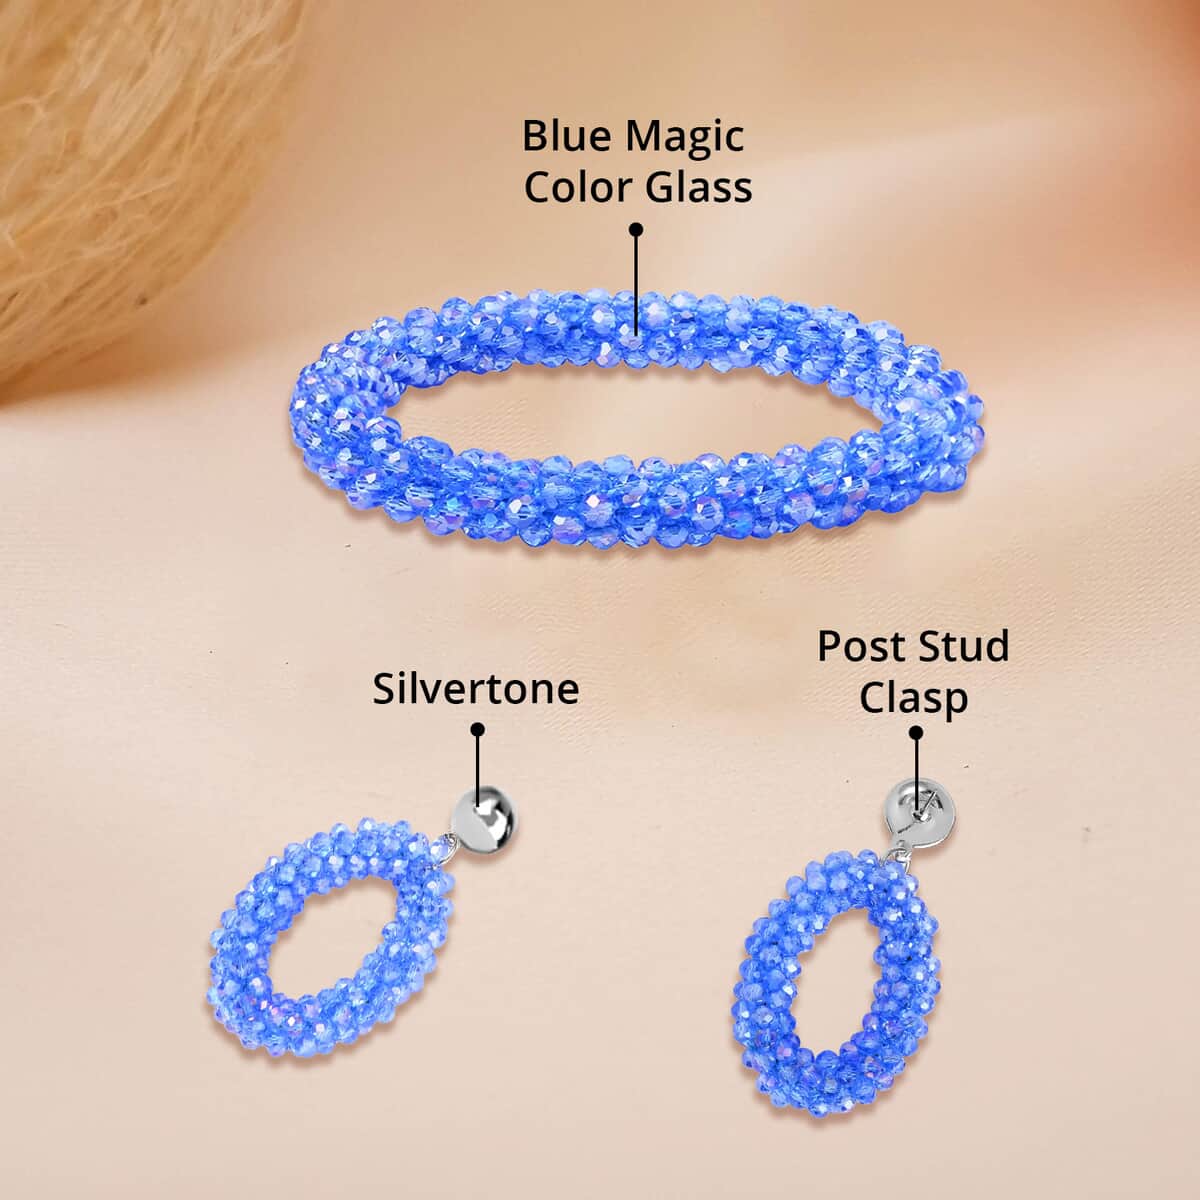 Blue Magic Color Glass Beaded Bracelet (7.0-7.50In) and Earrings in Silvertone image number 4